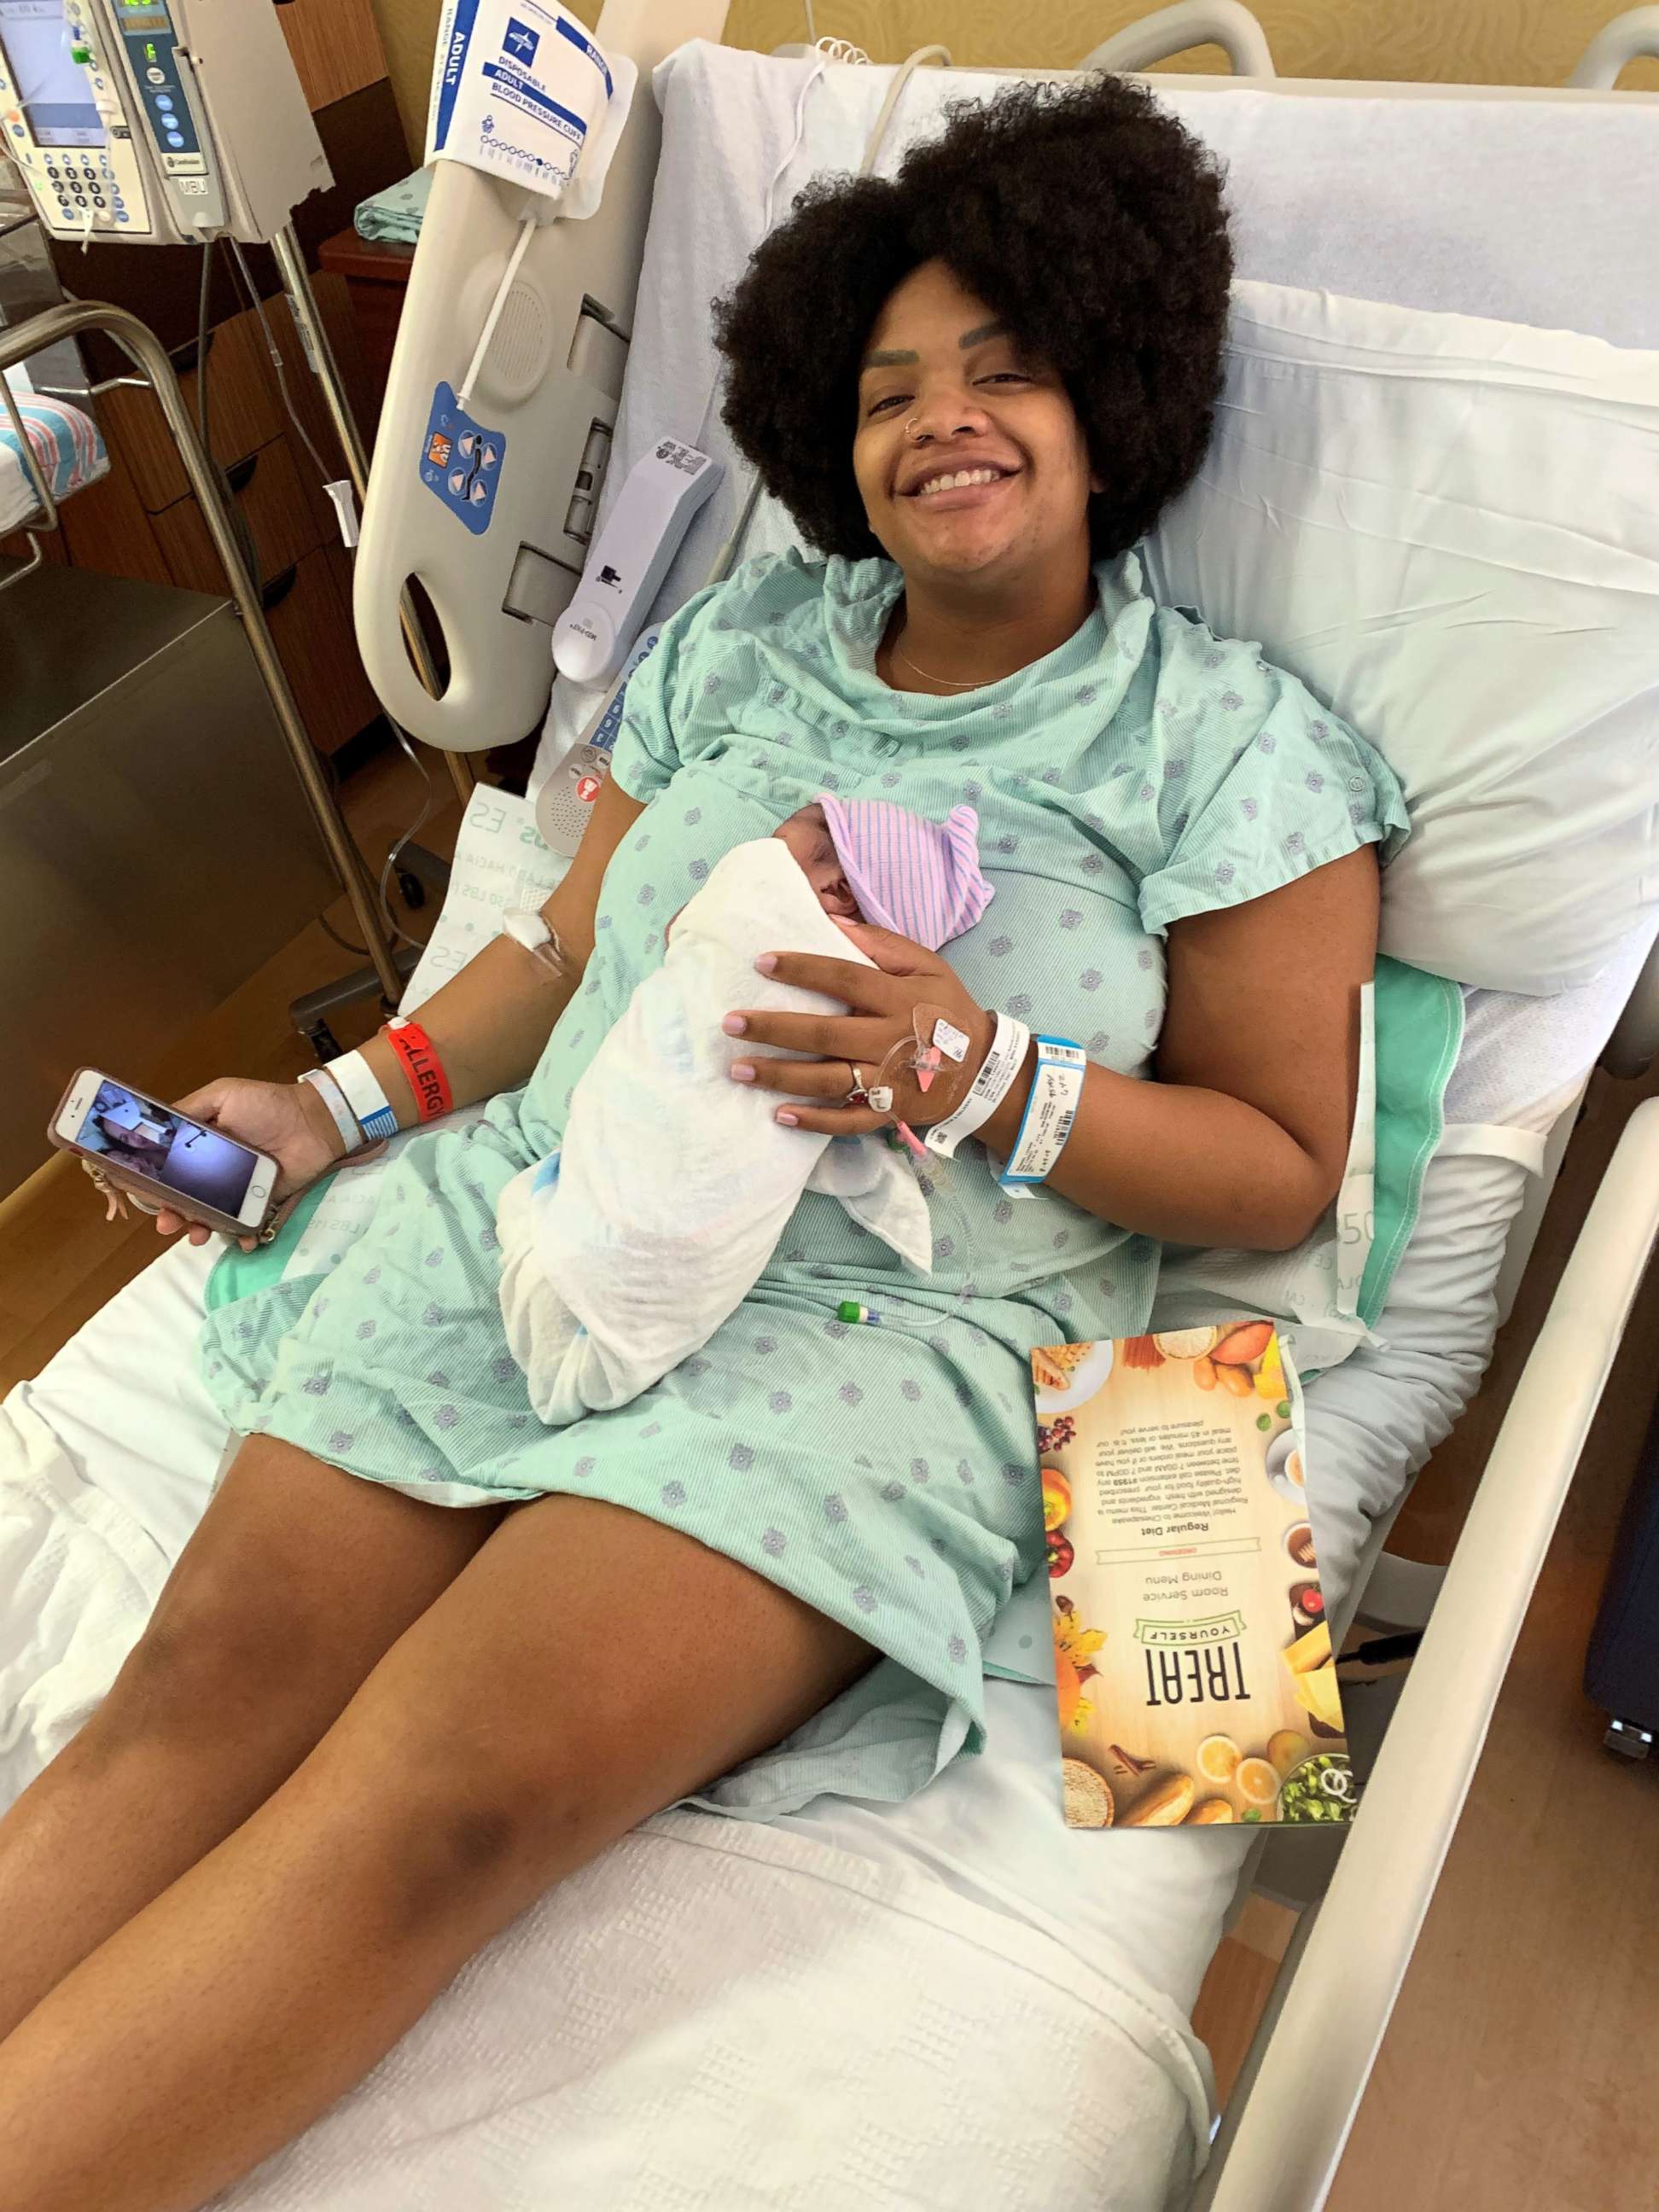 PHOTO: LeeAnn Bienaime of Chesapeake, Va., gave birth to her firstborn in her bathtub on Aug. 24, 2019 after being told to go home by the hospital hours before.